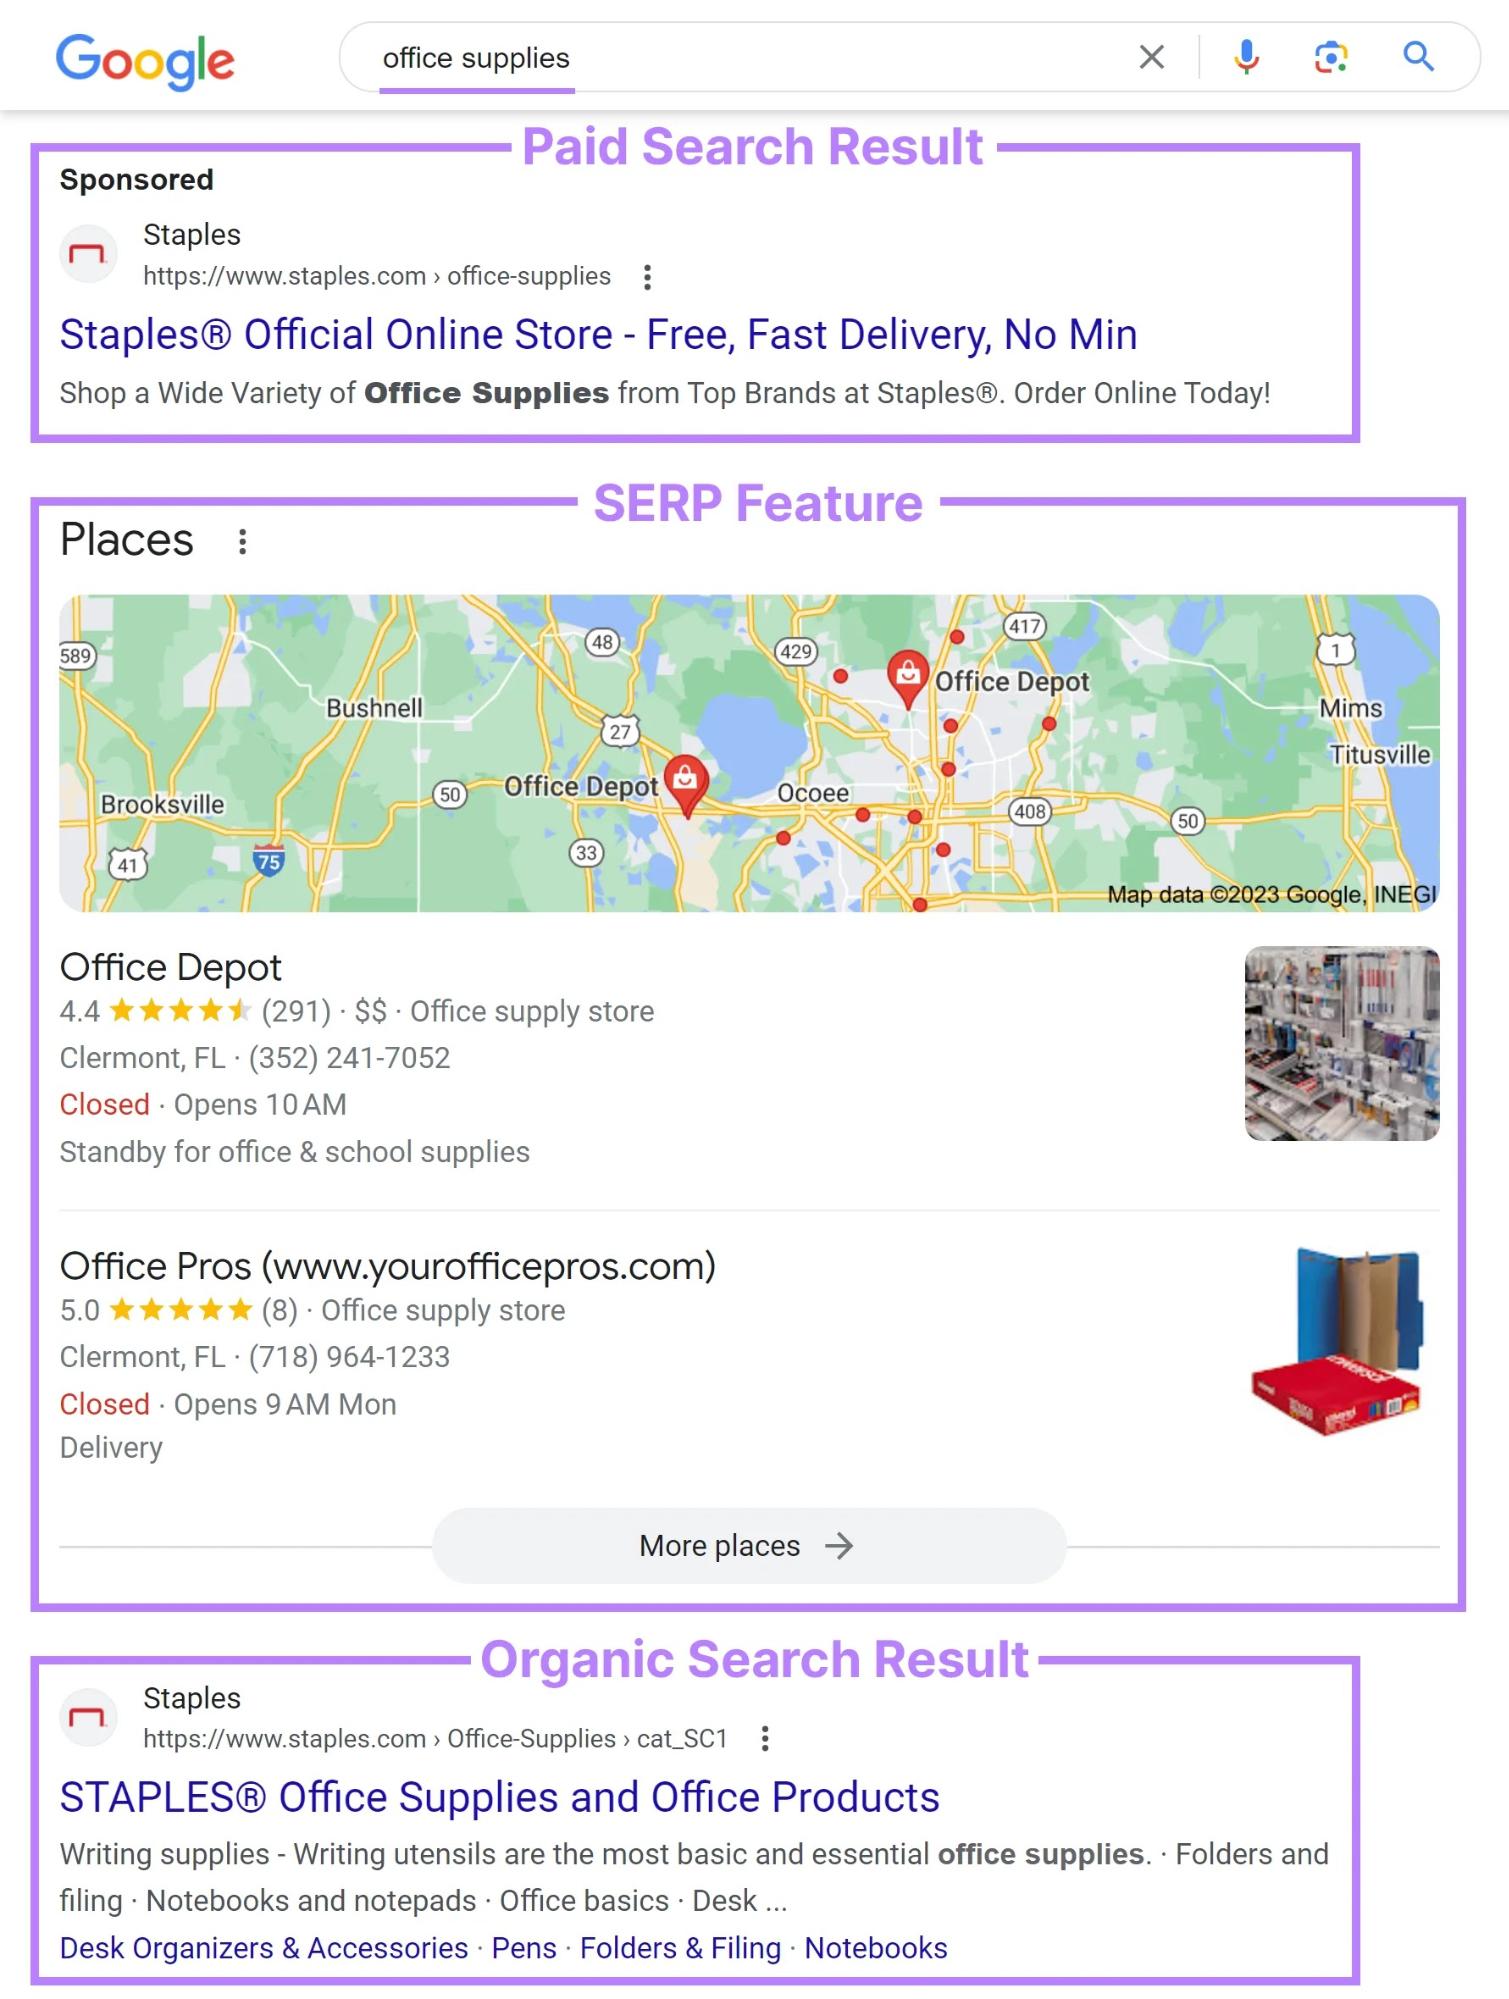 Google SERP for "office supplies" with paid search result first, followed by "Places" feature and organic search results